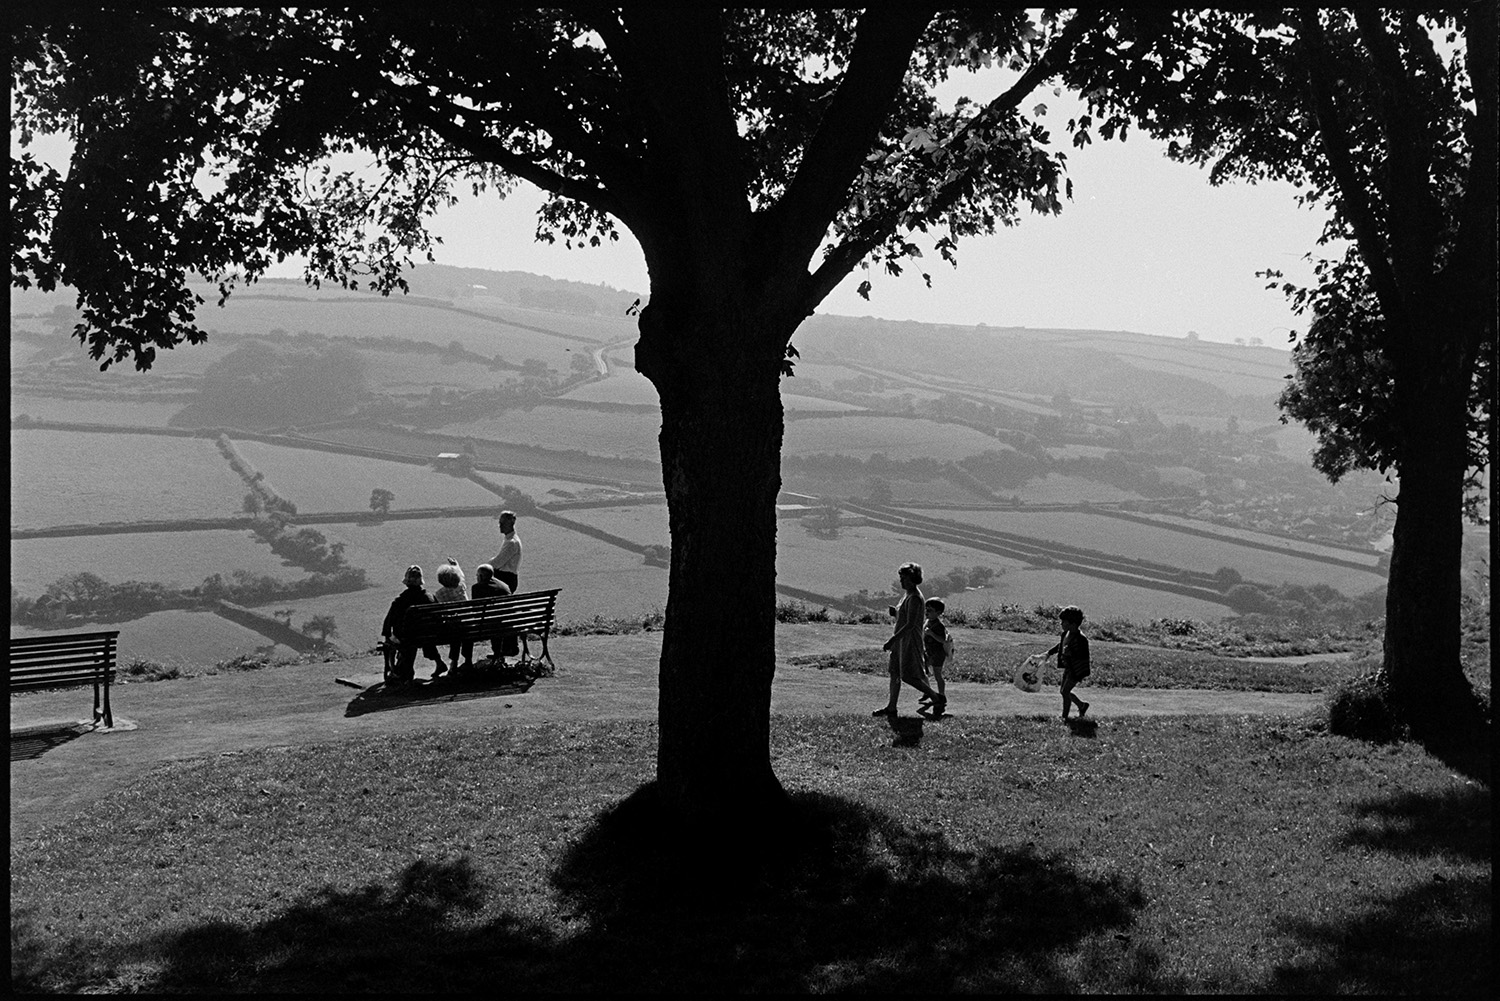 People and children enjoying park and fine view, bicycles. 
[People sitting on a bench in a park at Torrington looking out at a view of trees and fields in the valley below. Children are walking past a tree in the foreground.]